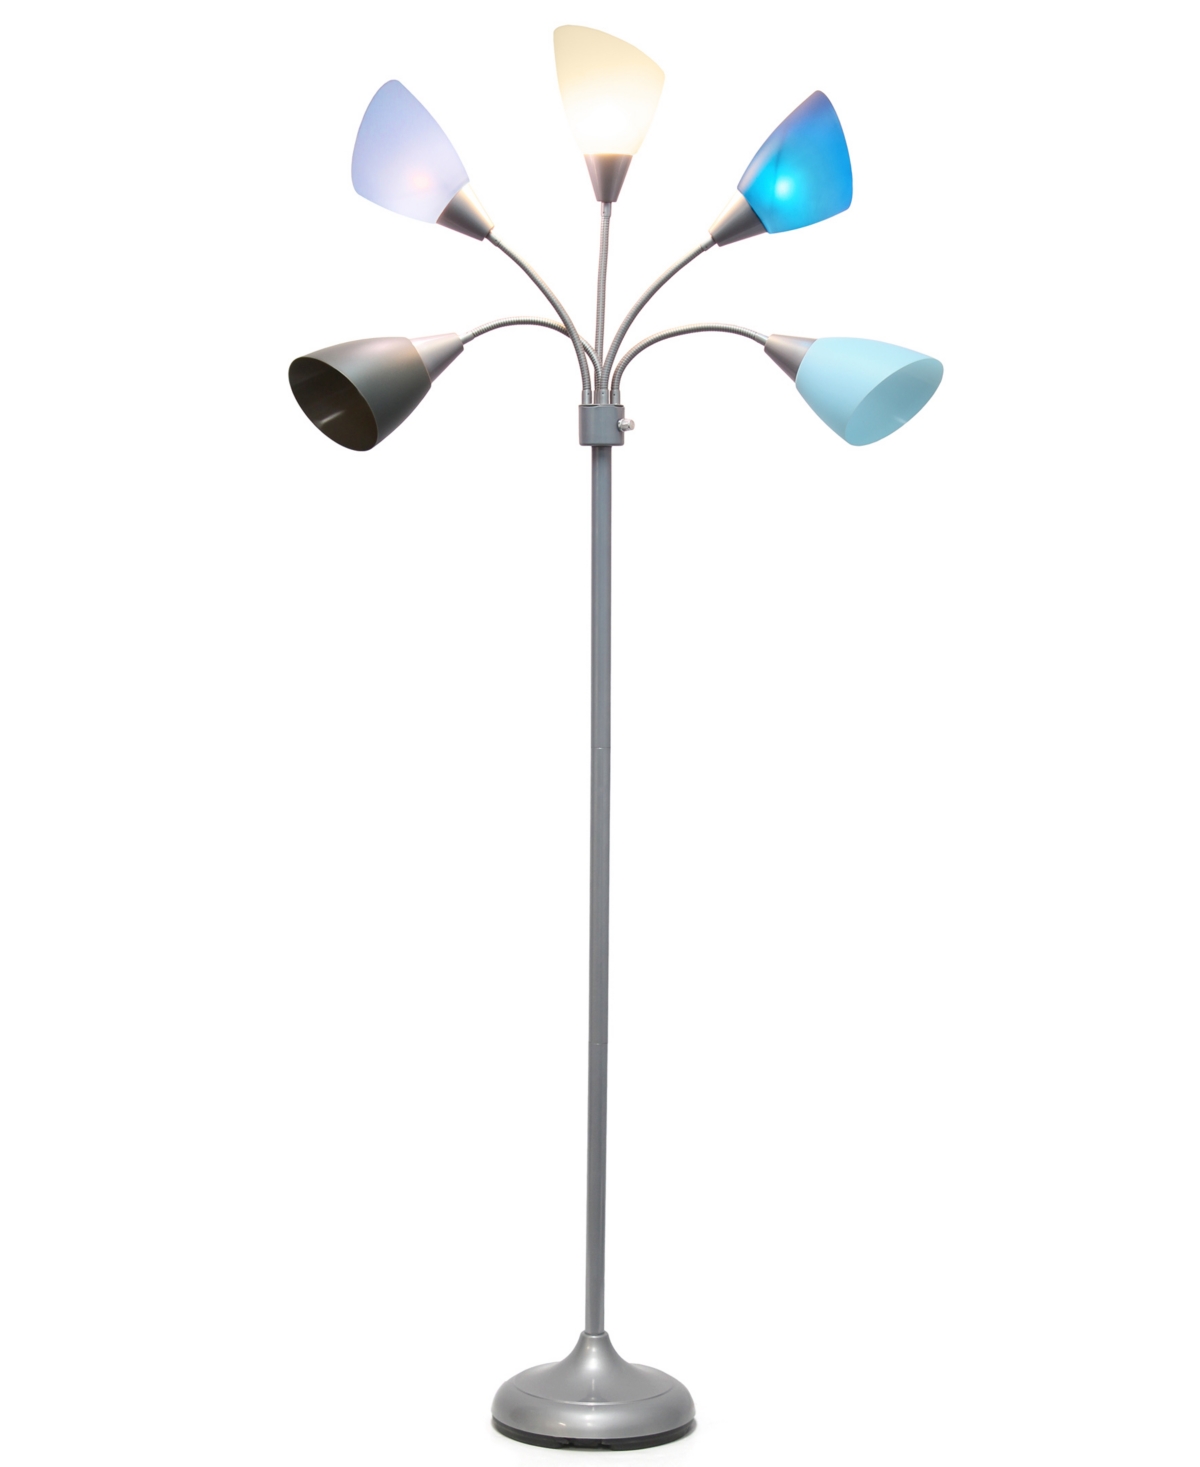 All The Rages Simple Designs 5 Light Adjustable Gooseneck Floor Lamp With Shades In Silver,blue,white